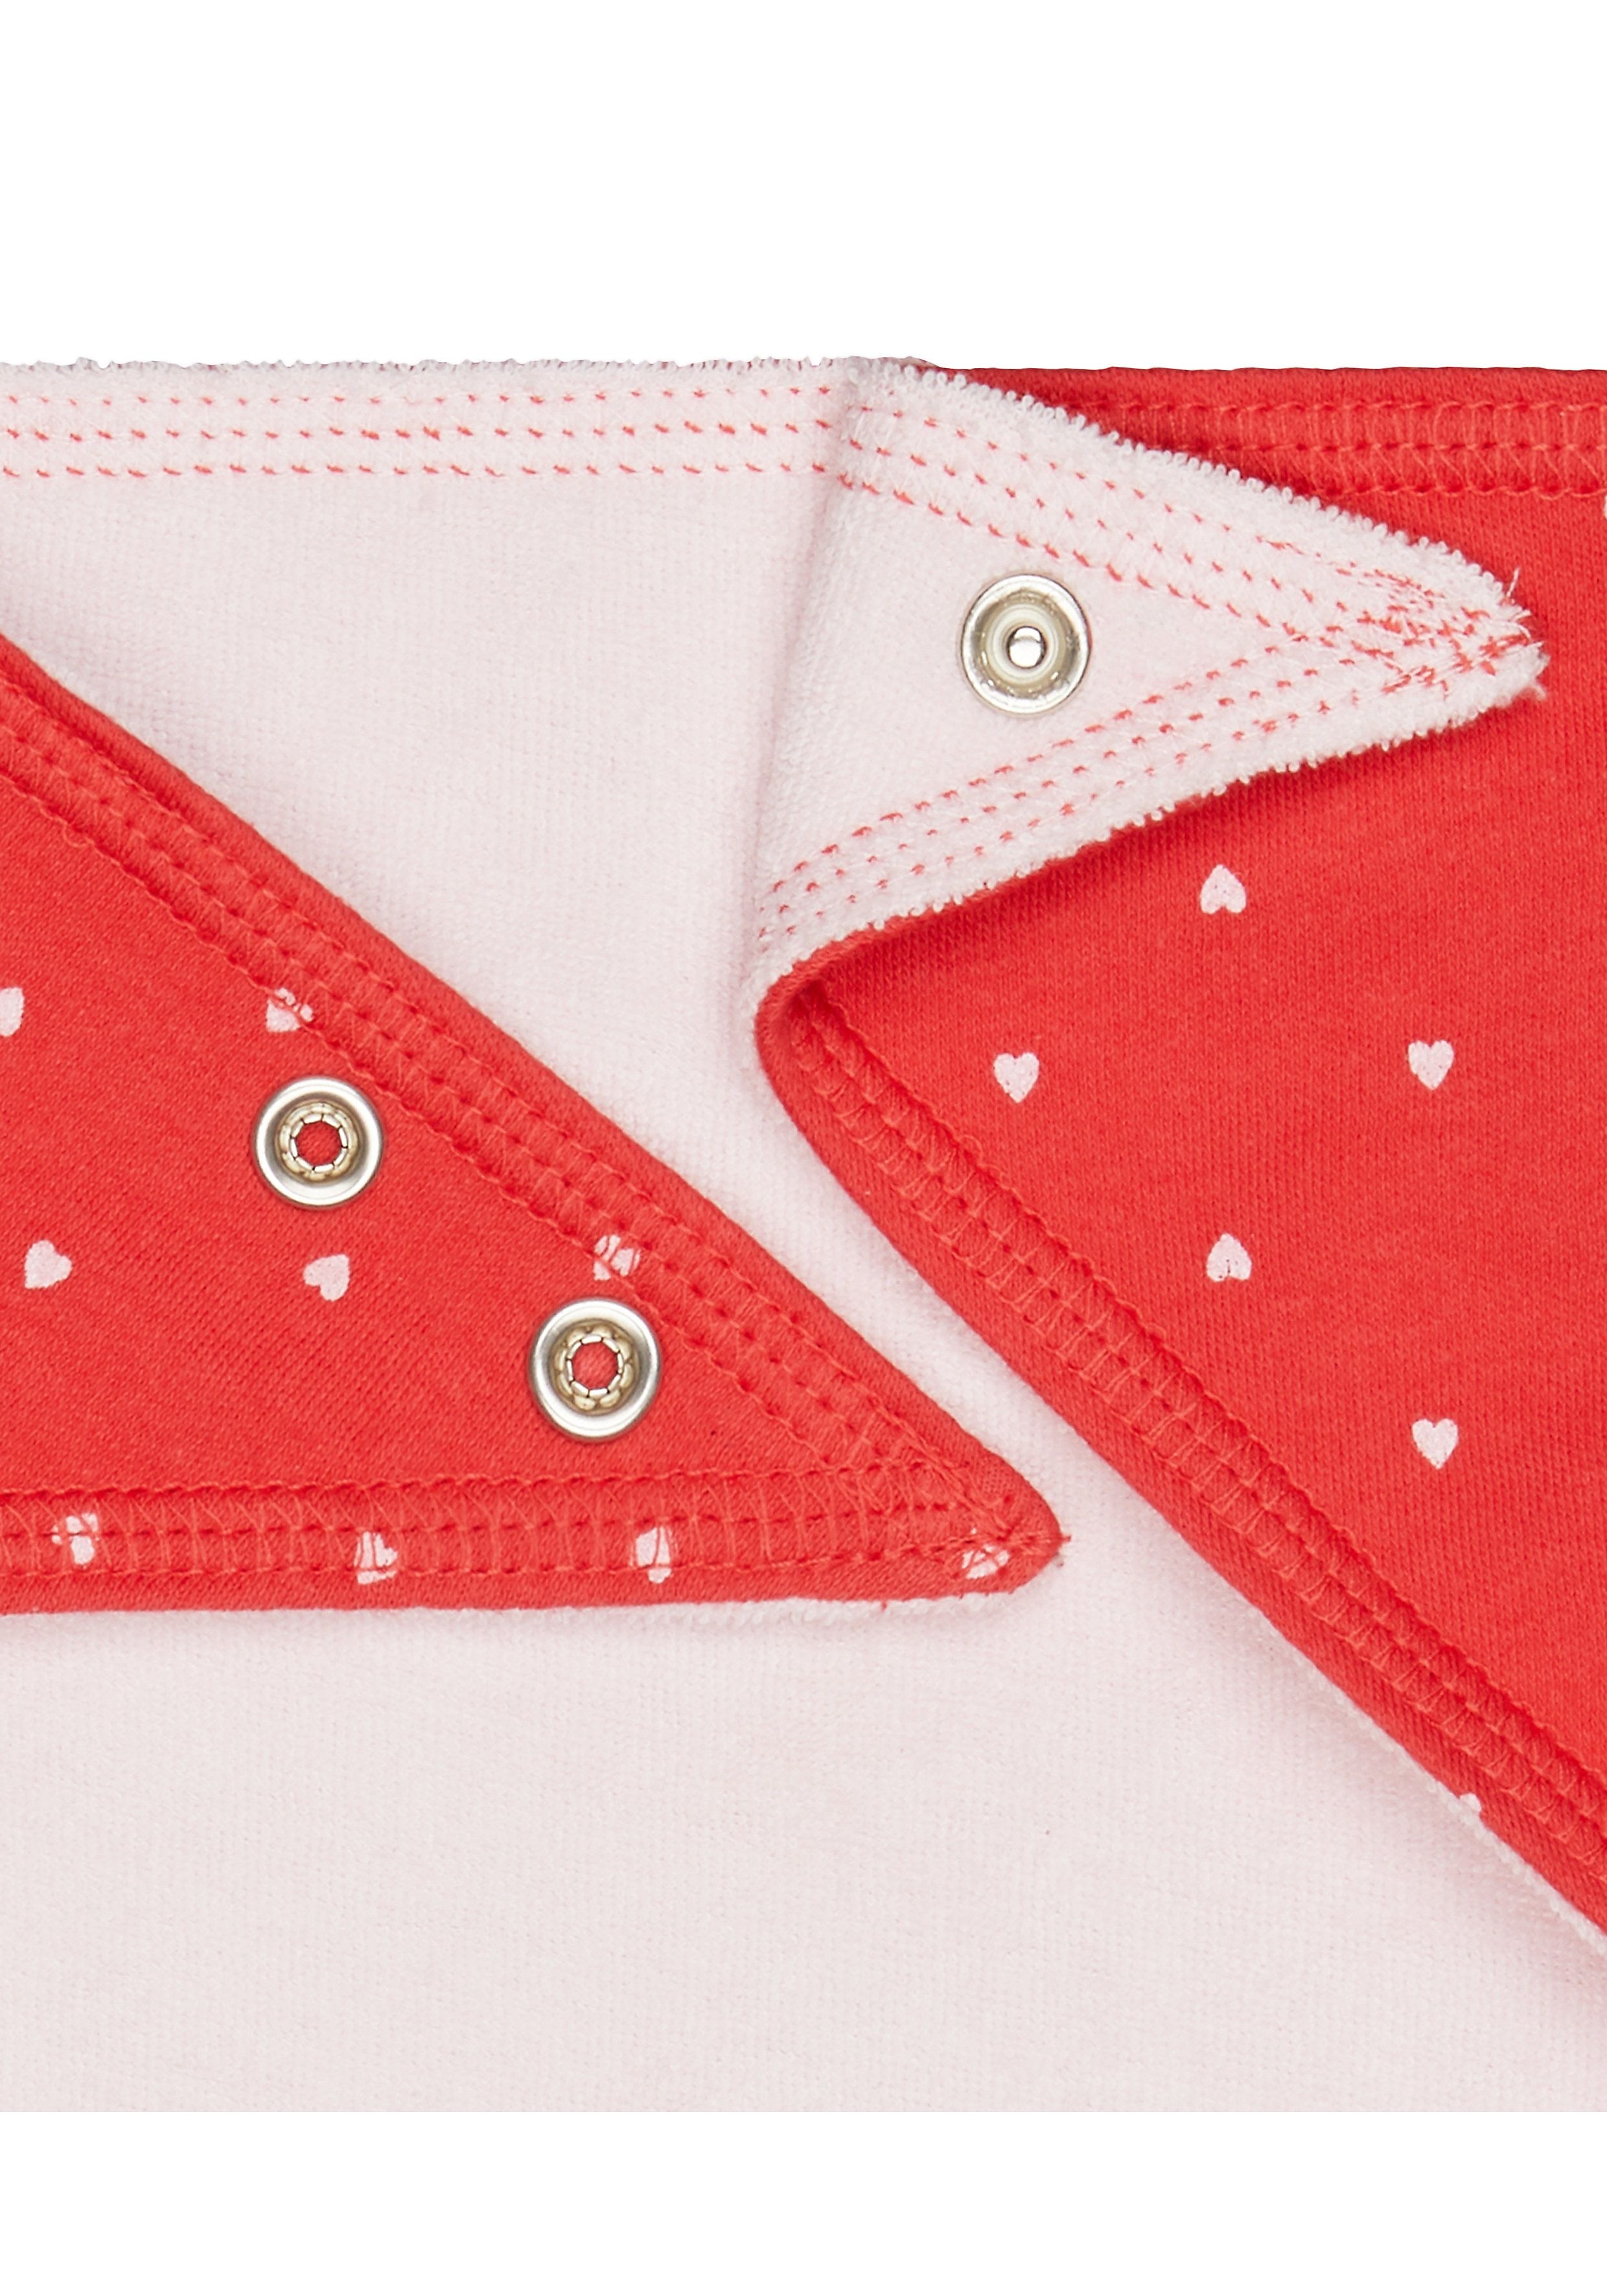 Mothercare | White and Red Printed Bibs - Pack of 3 1